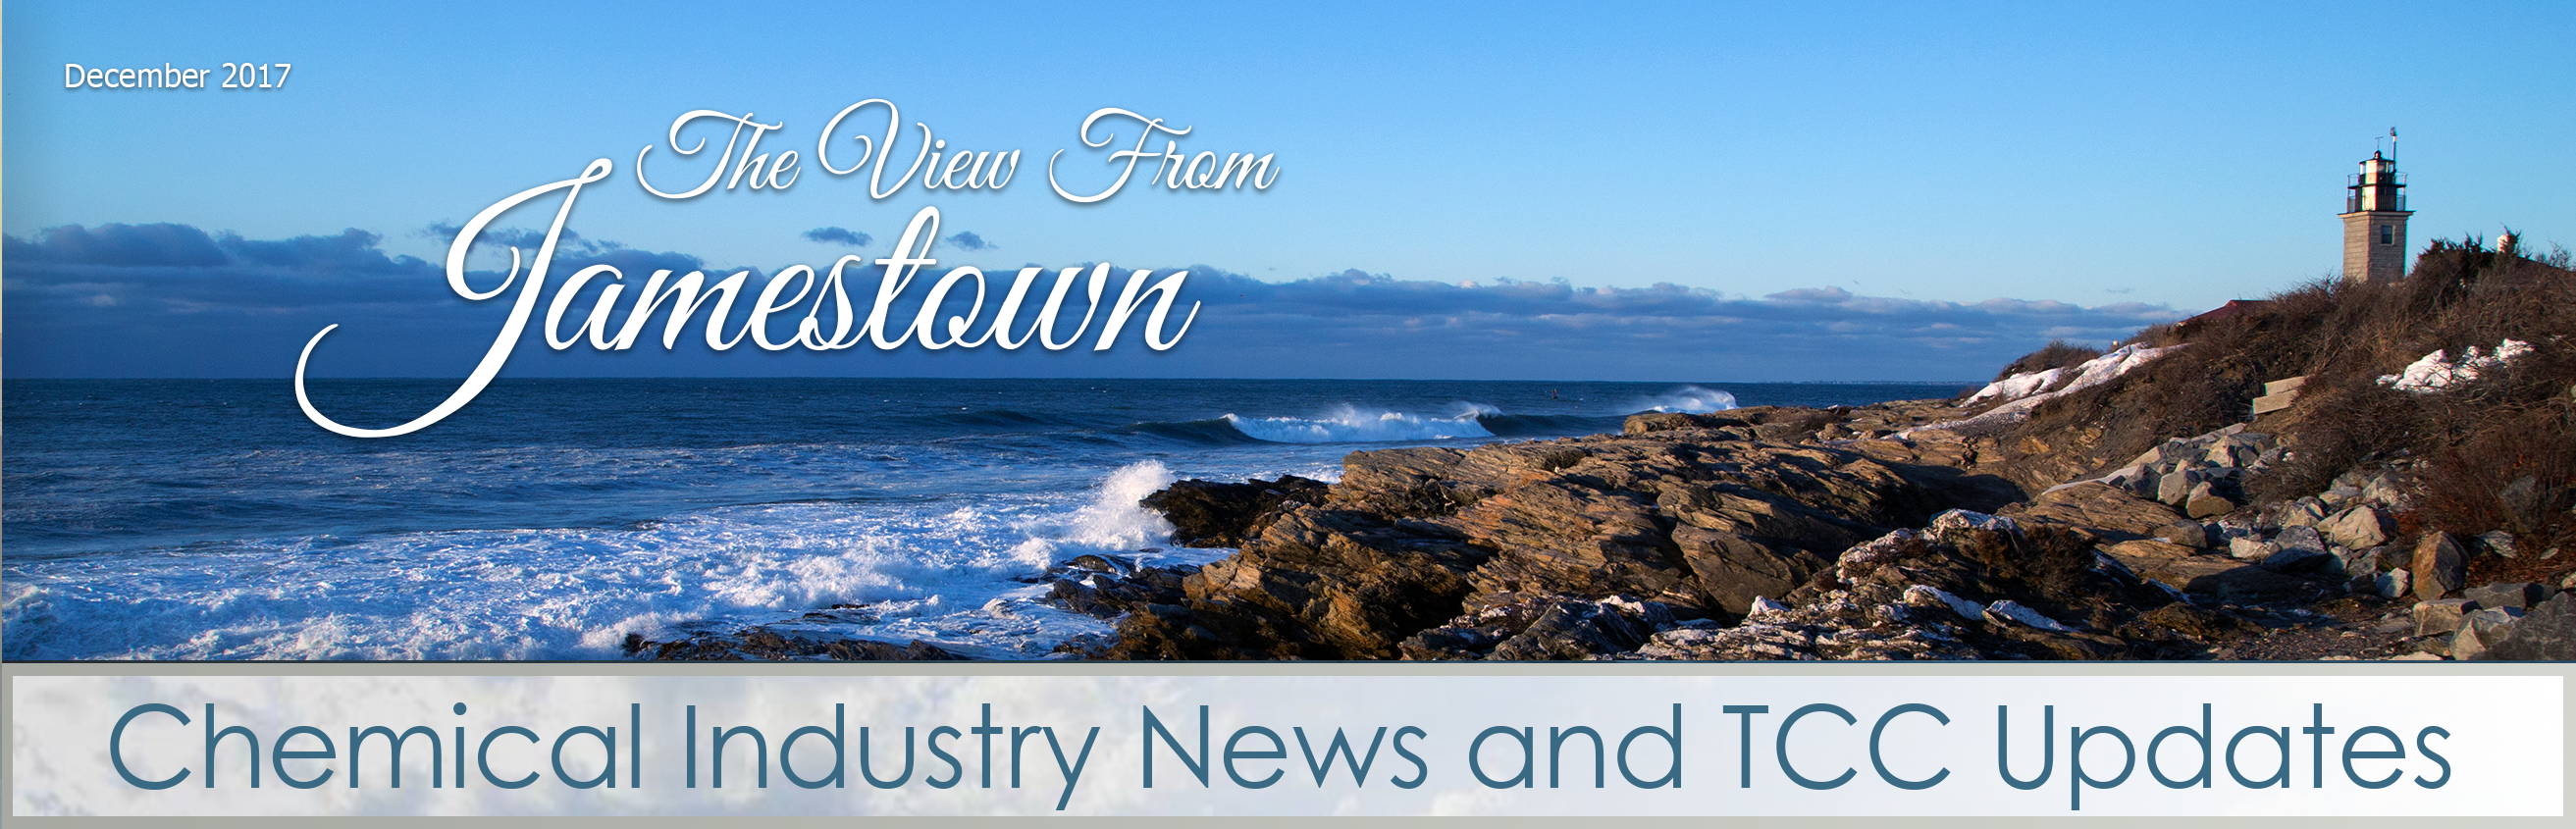 The view from Jamestown December 2017 - The Chemical Company | Chemical Distributor